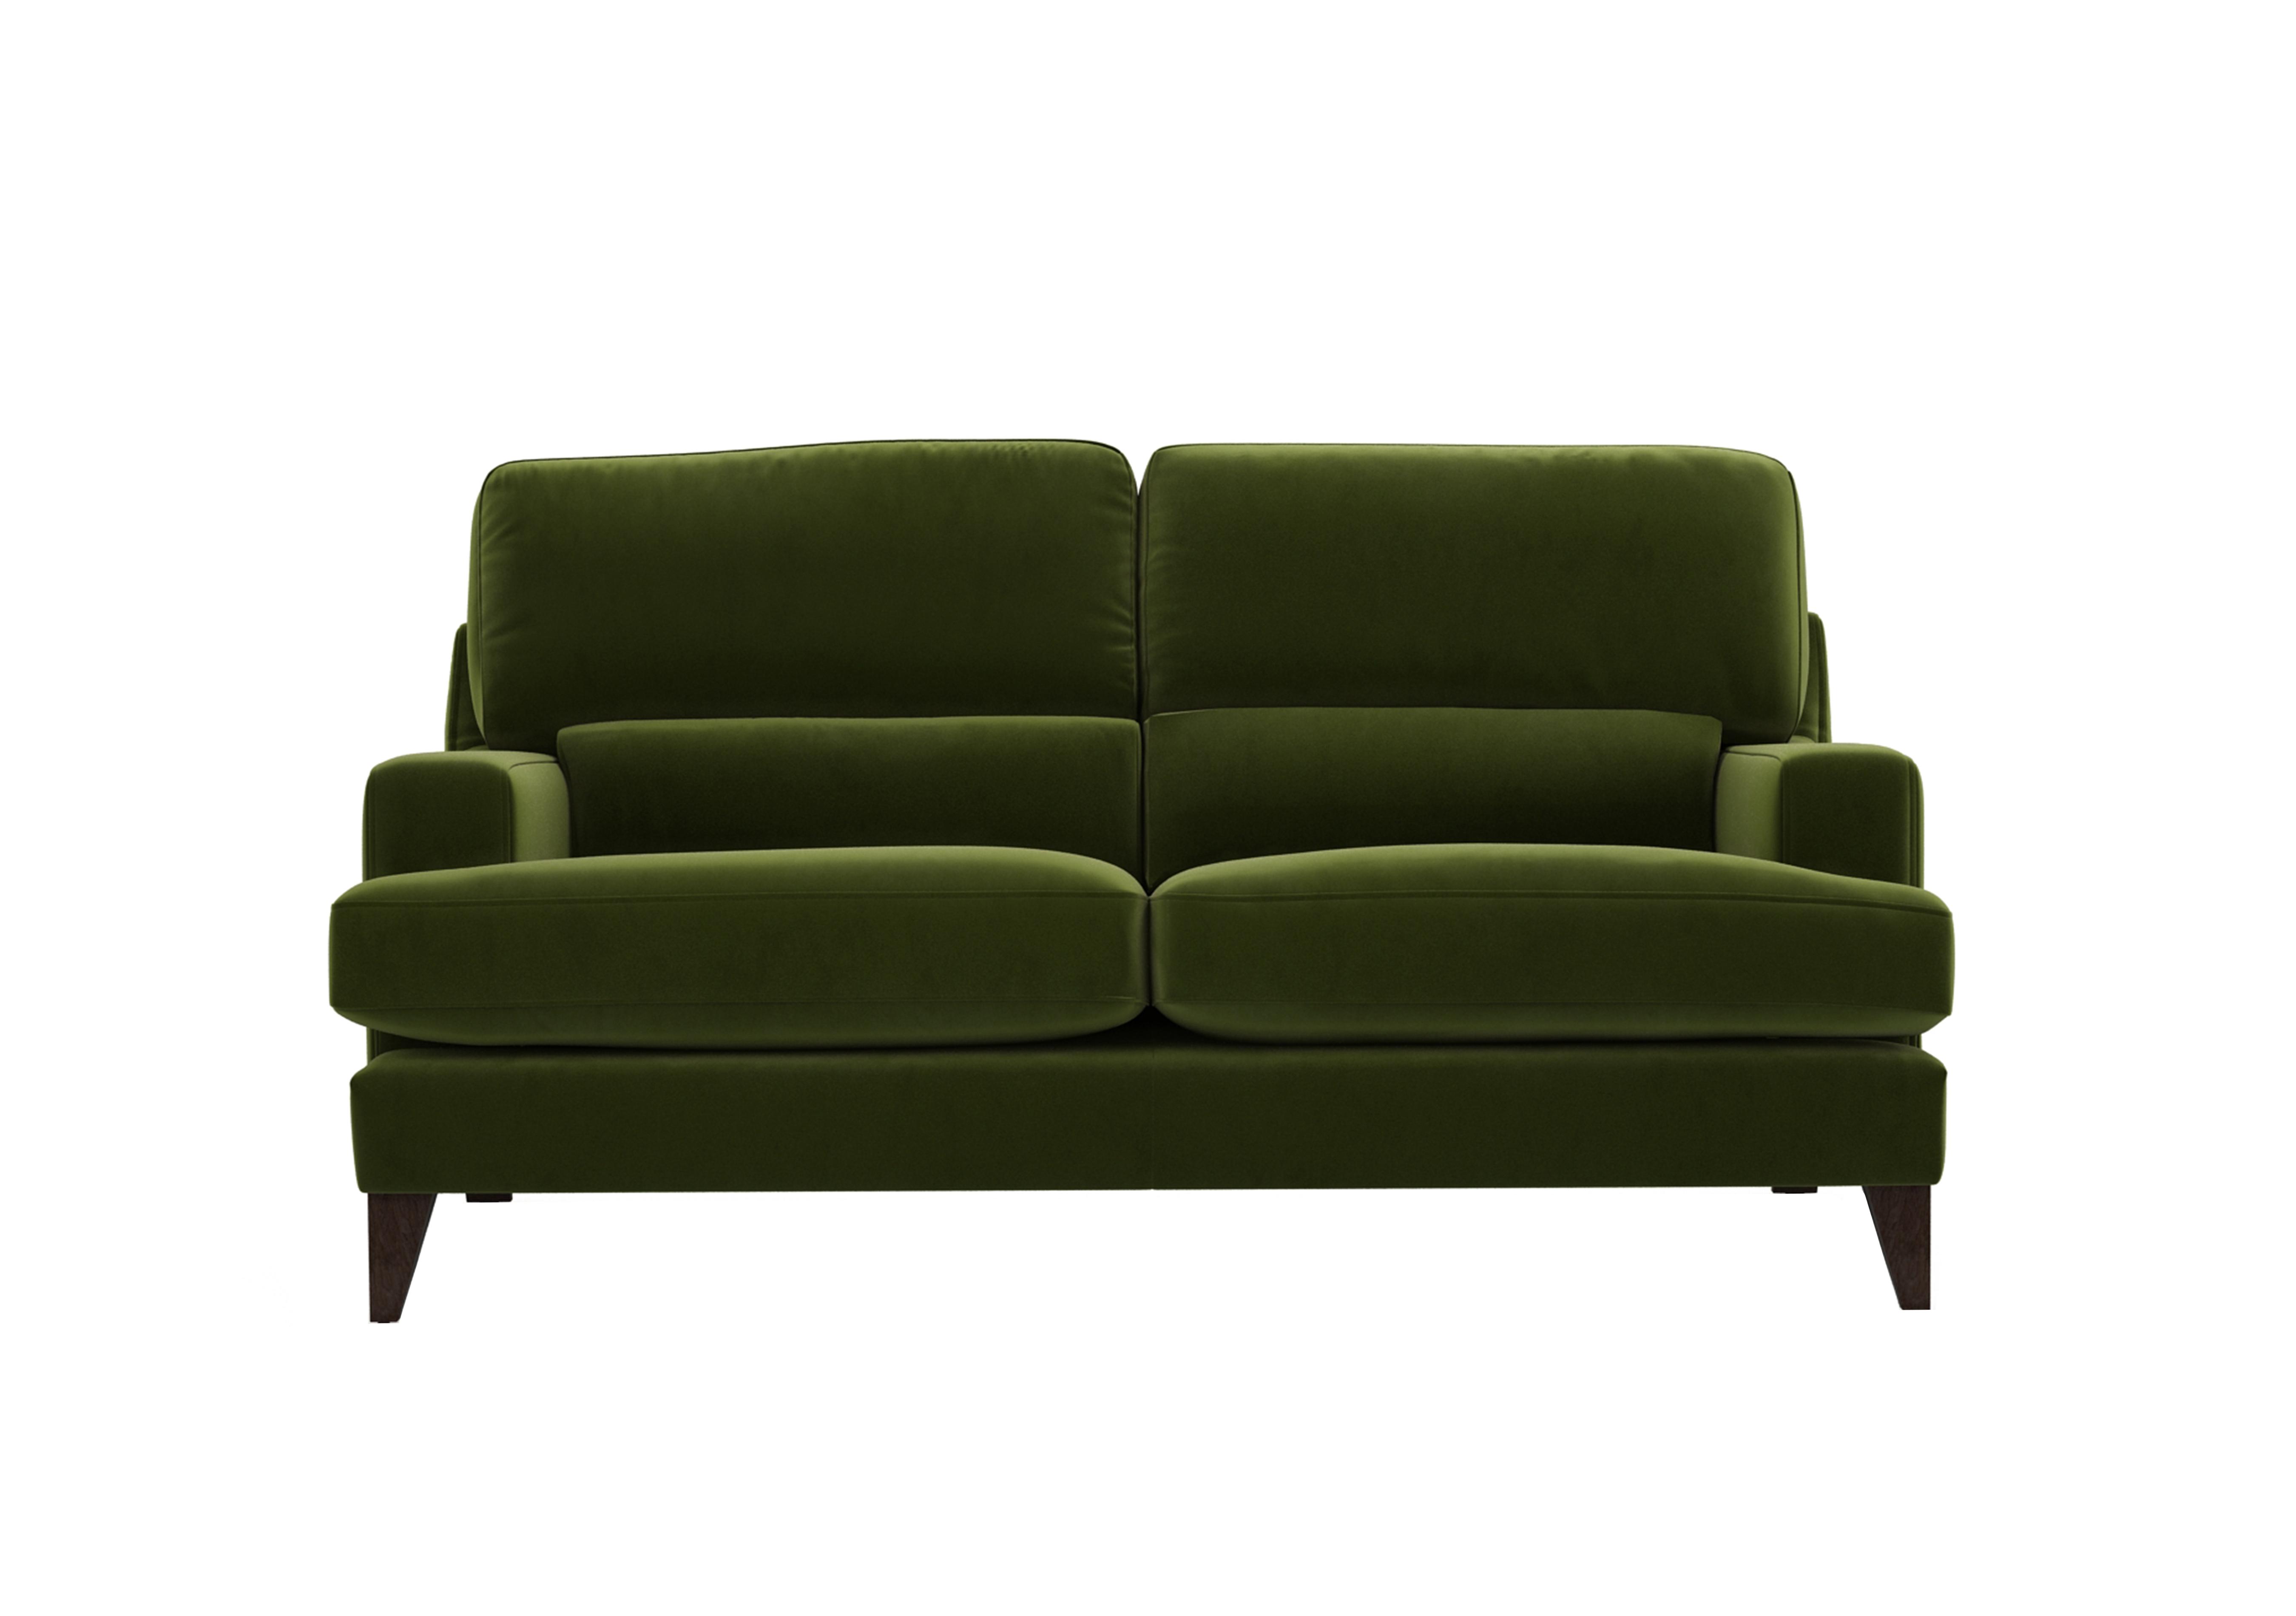 Romilly 2.5 Seater Fabric Sofa in Woo160 Woodland Moss Wa Ft on Furniture Village